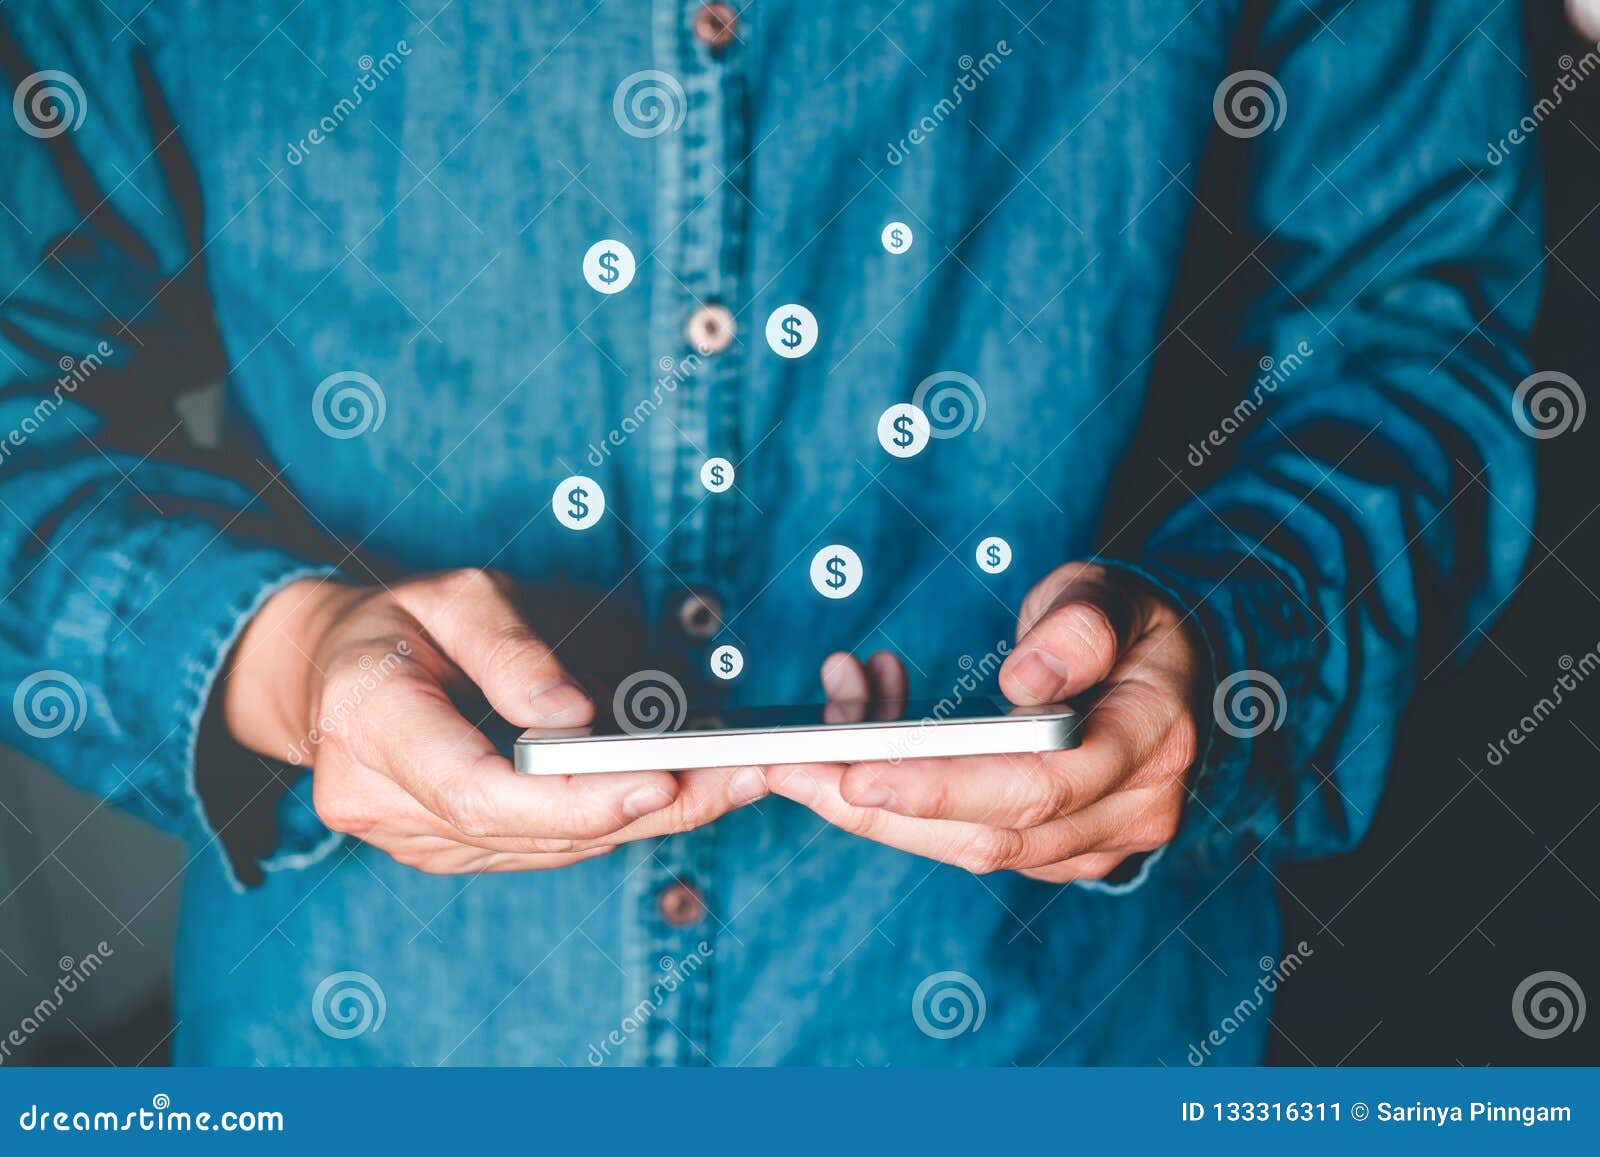 online banking businessman using smartphone with credit card fin